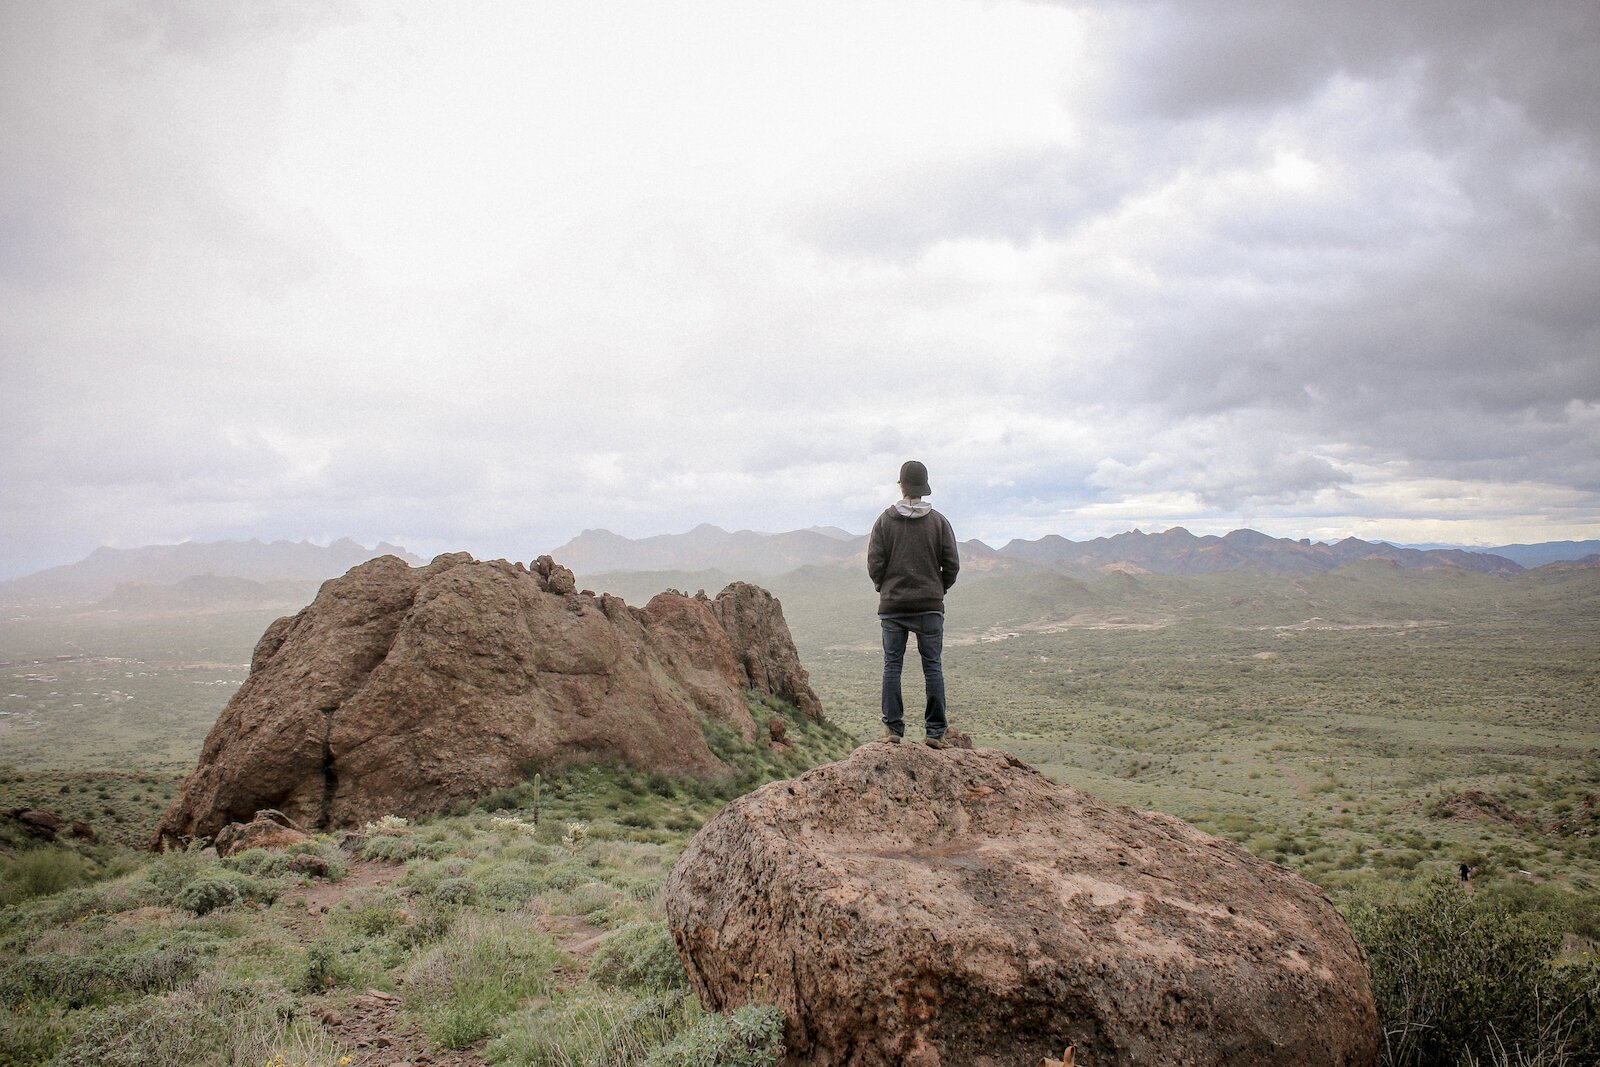 While hiking in Lost Dutchman State Park in Arizona, Erica Esslinger stops to take in the view.